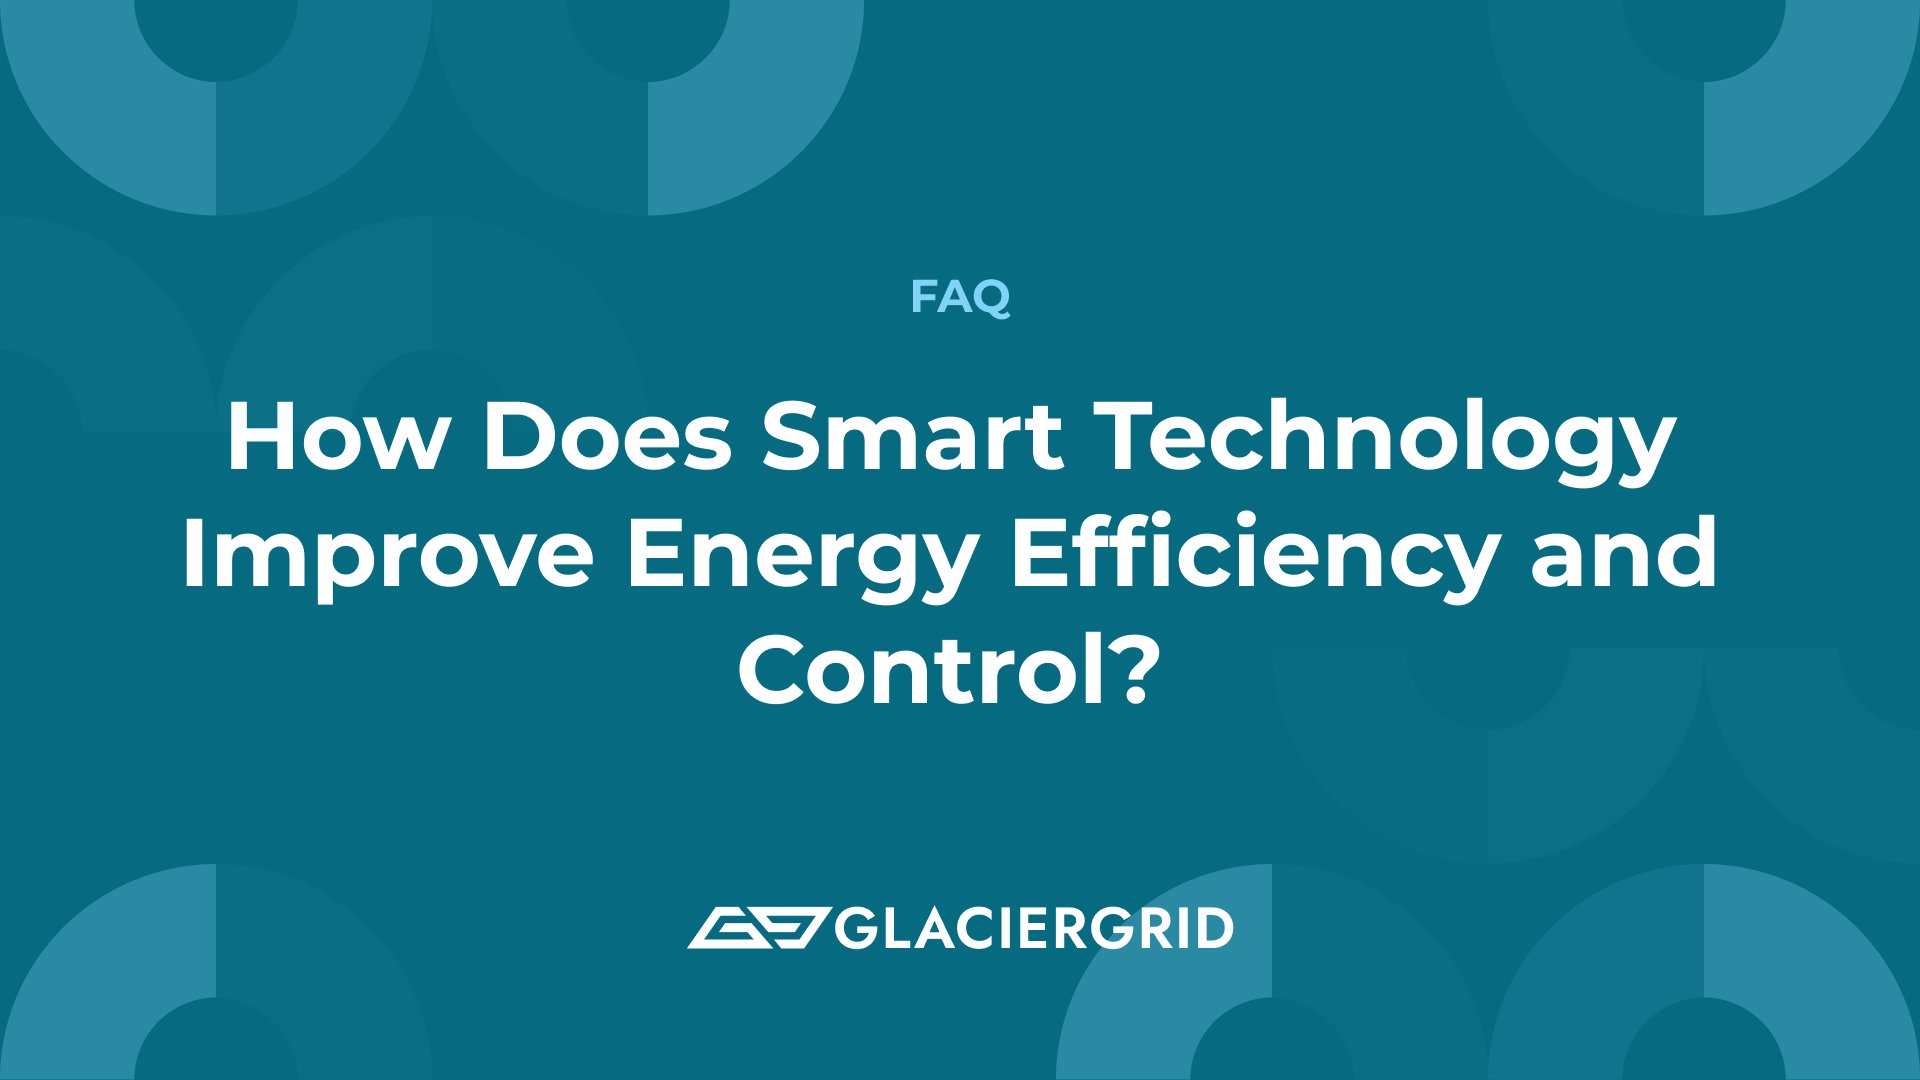 Featured image = How Does Smart Technology Improve Energy Efficiency and Control?